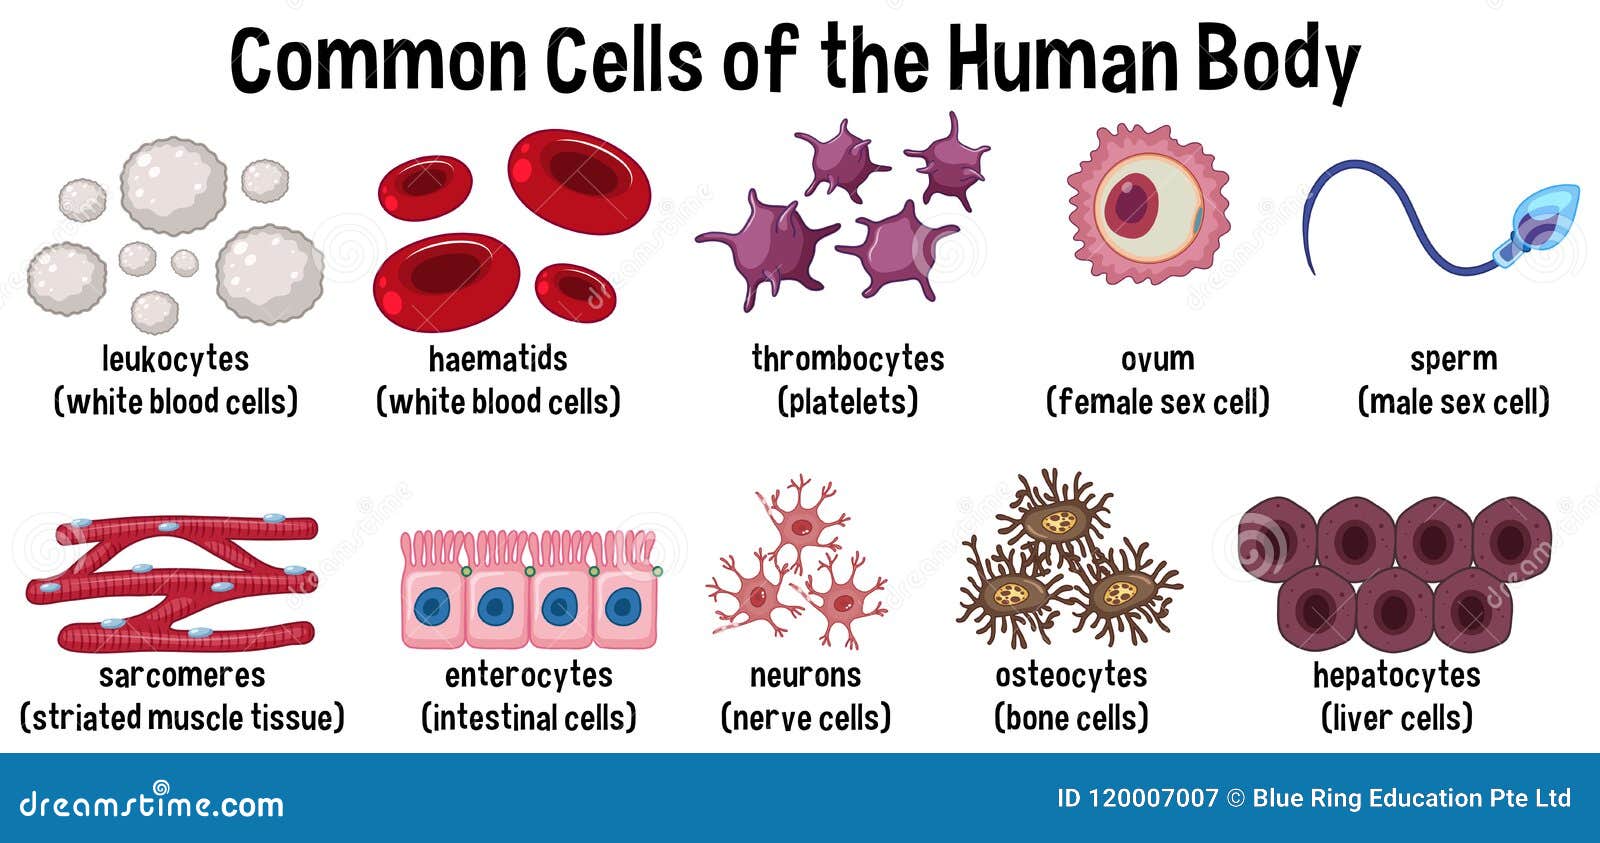 All Types Of Cells In The Human Body